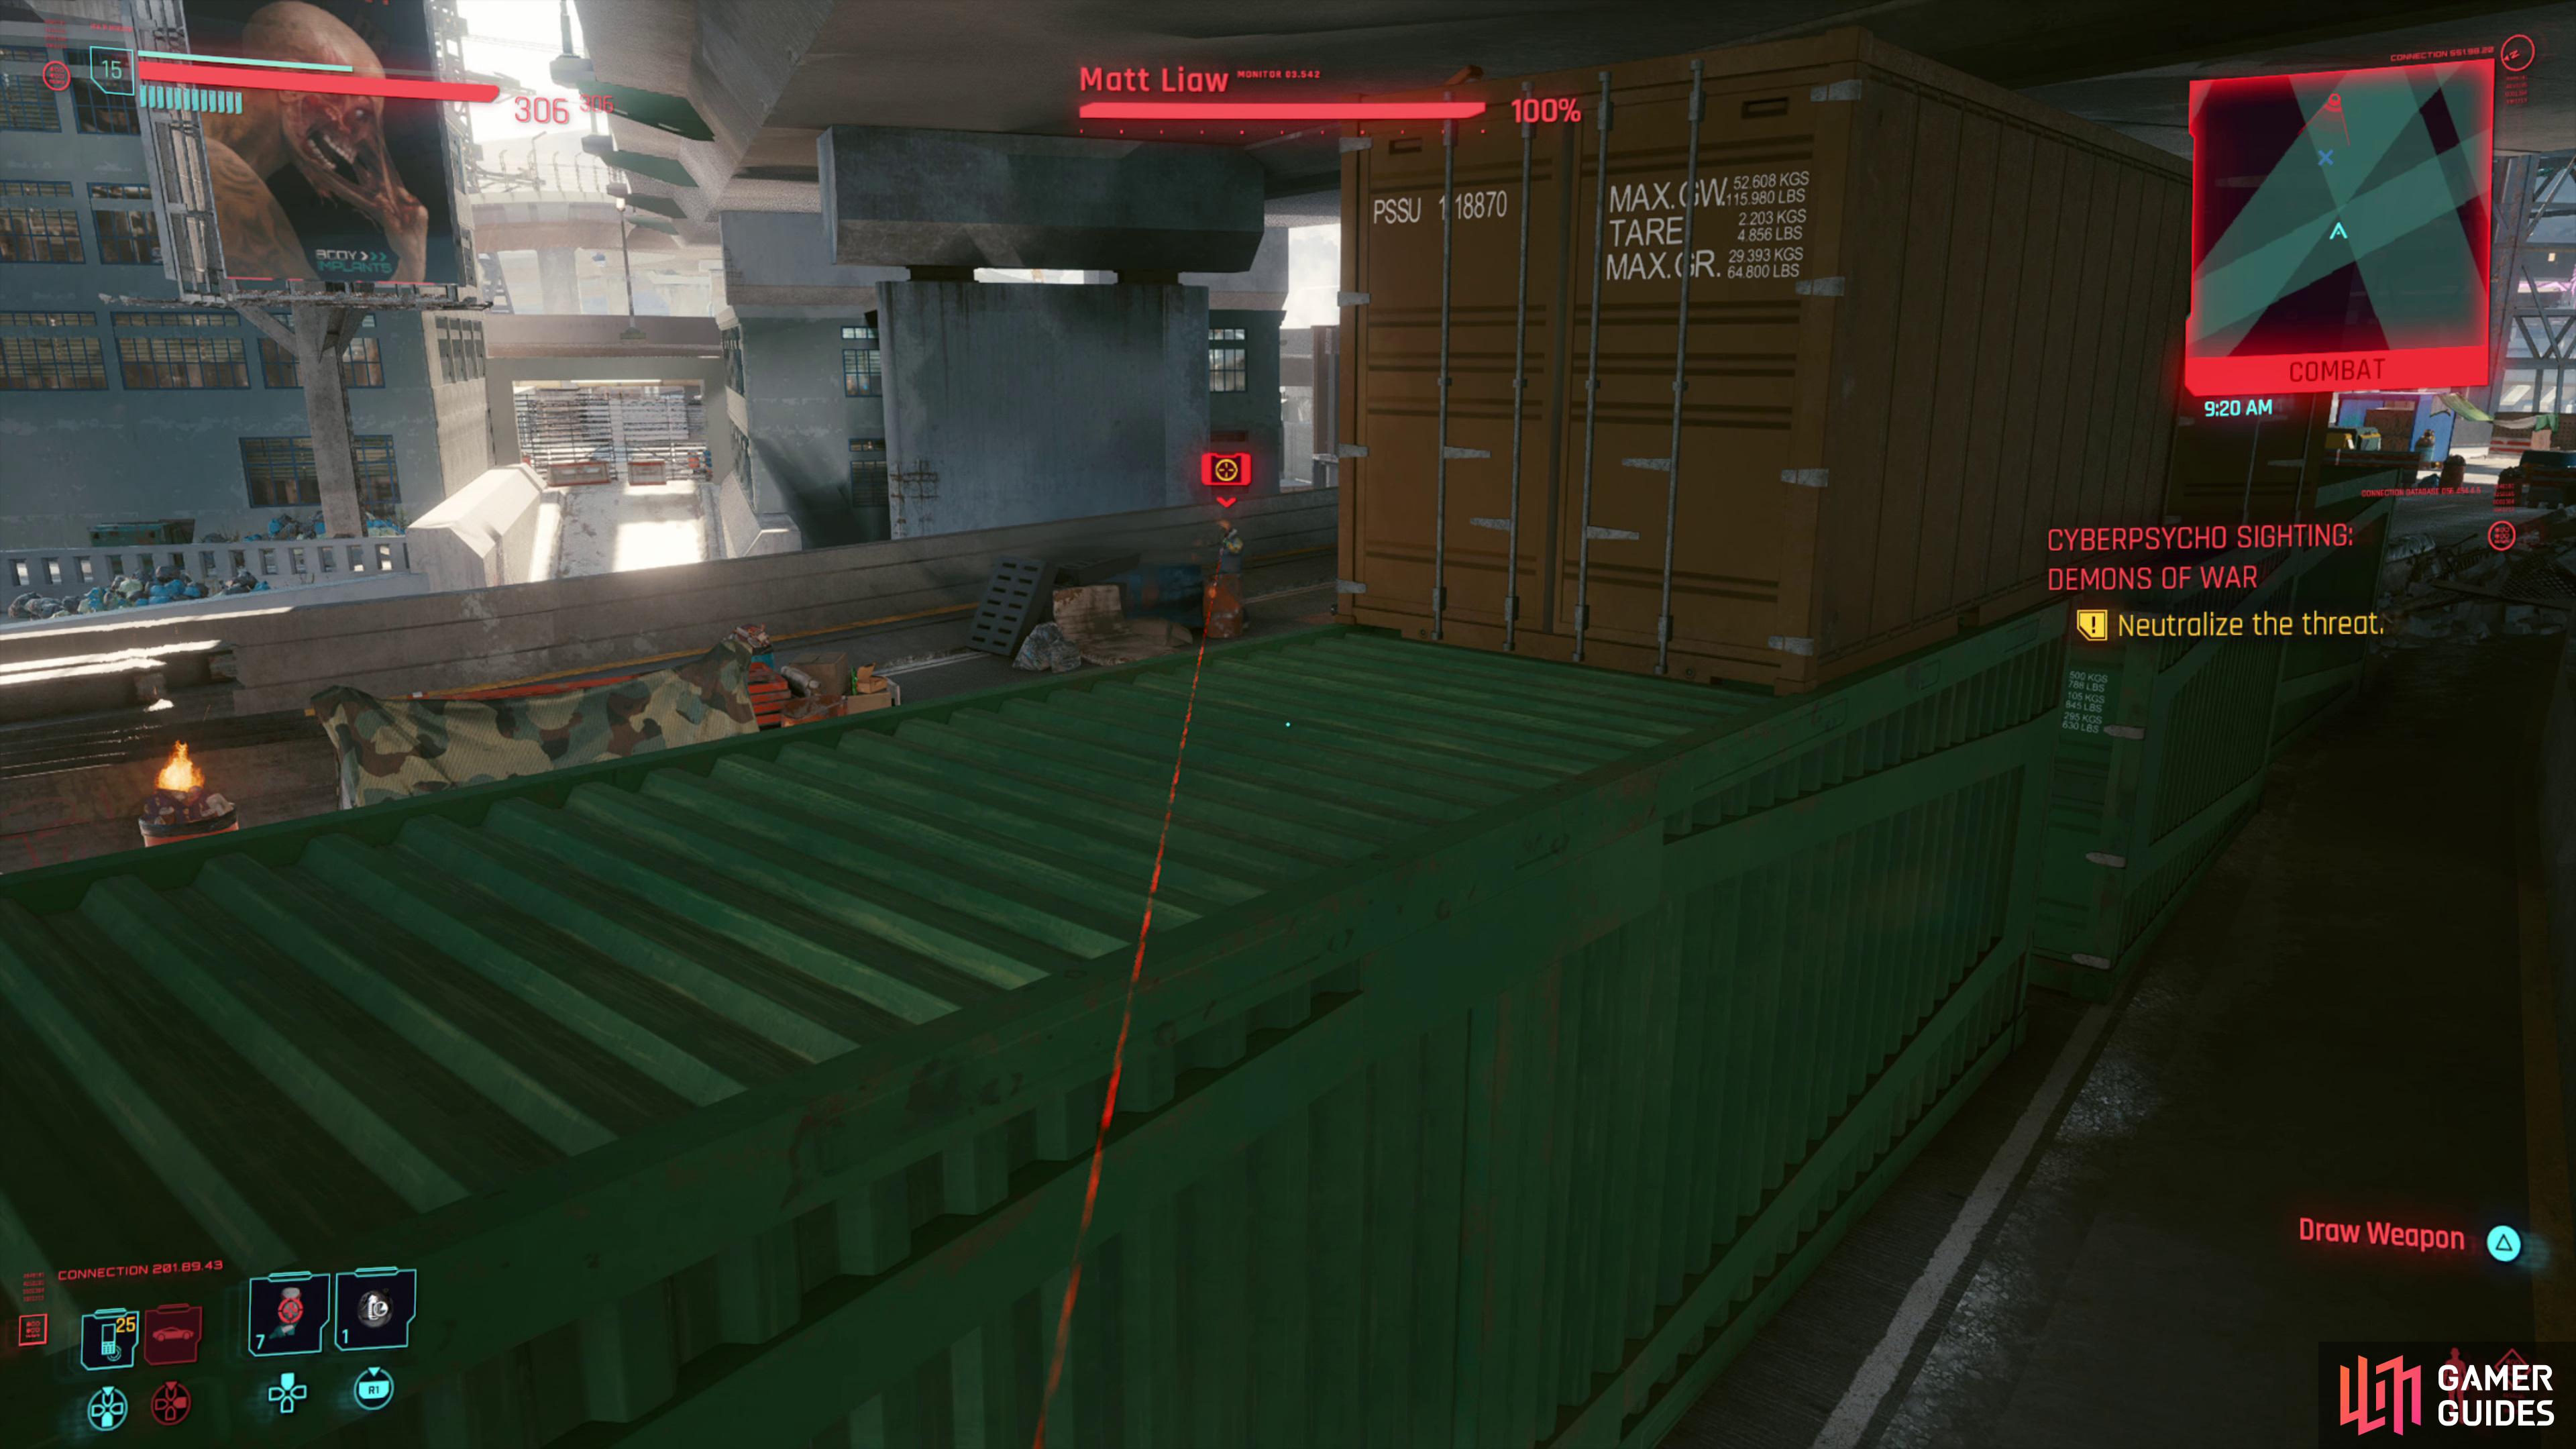 Avoid the sniper shots by hiding behind containers